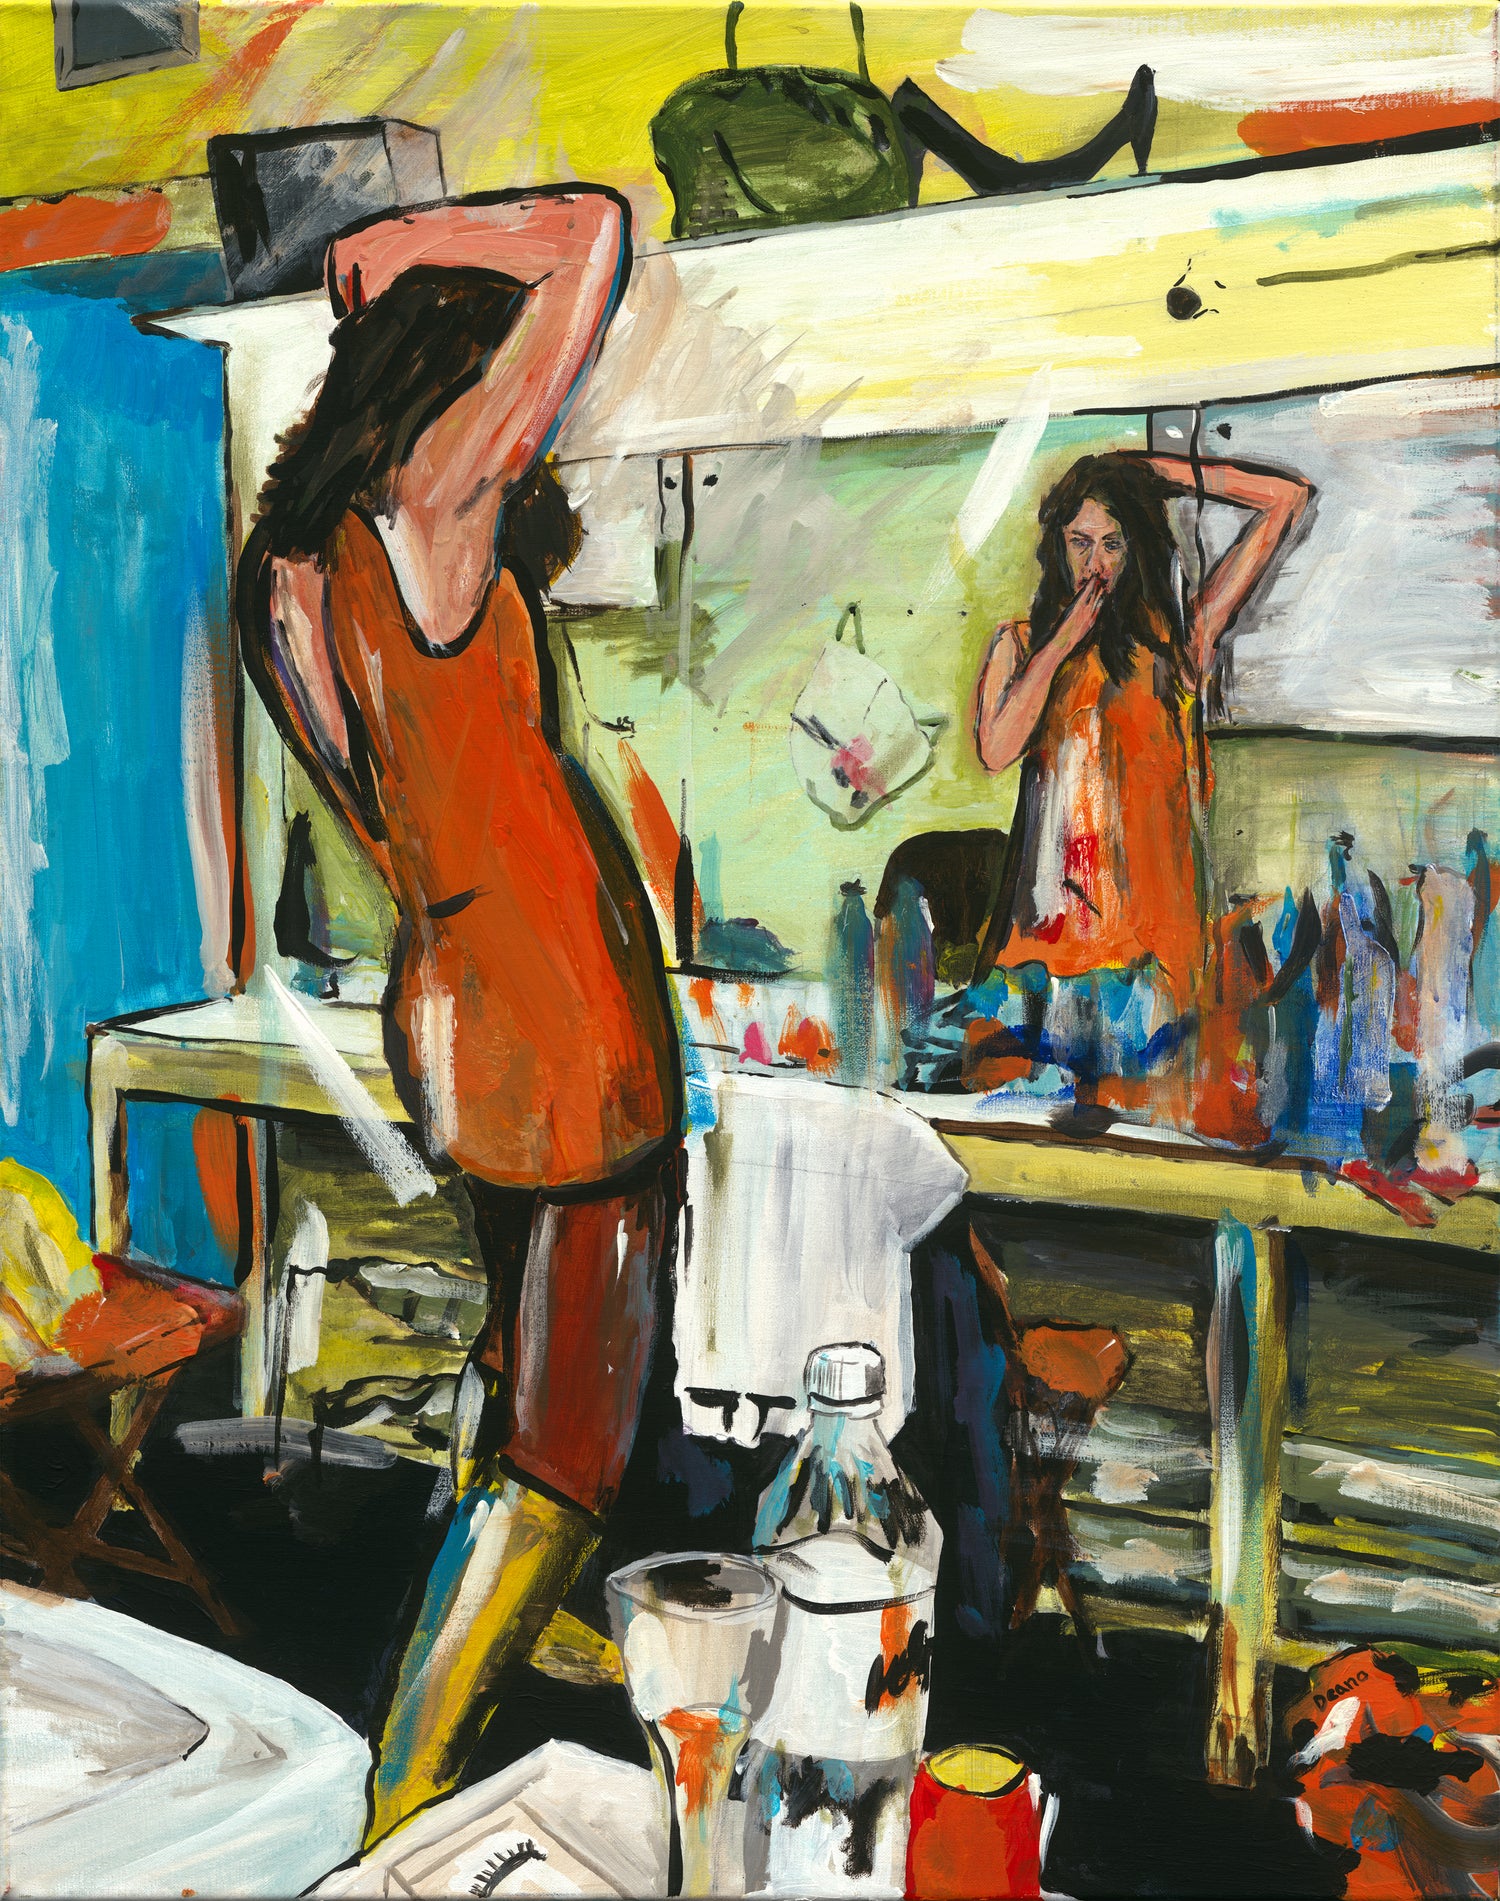 A painting depicting a woman preparing for a performance in her dressing room, surrounded by the tools of her trade.